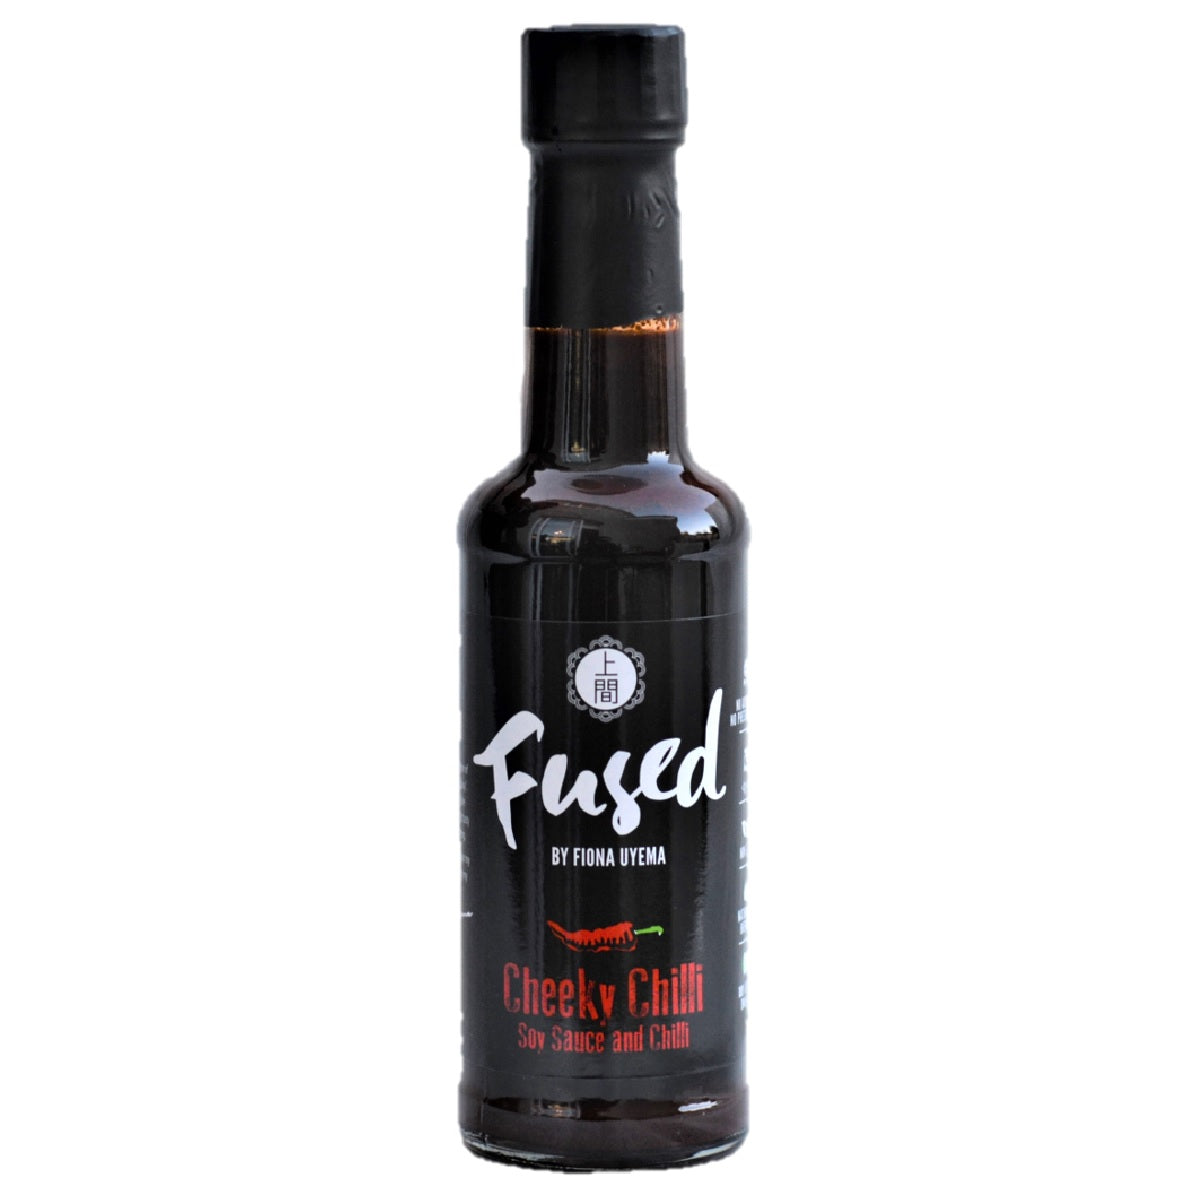 Fused by Fiona Uyema Cheeky Chilli Soy Sauce and Chilli 150ml